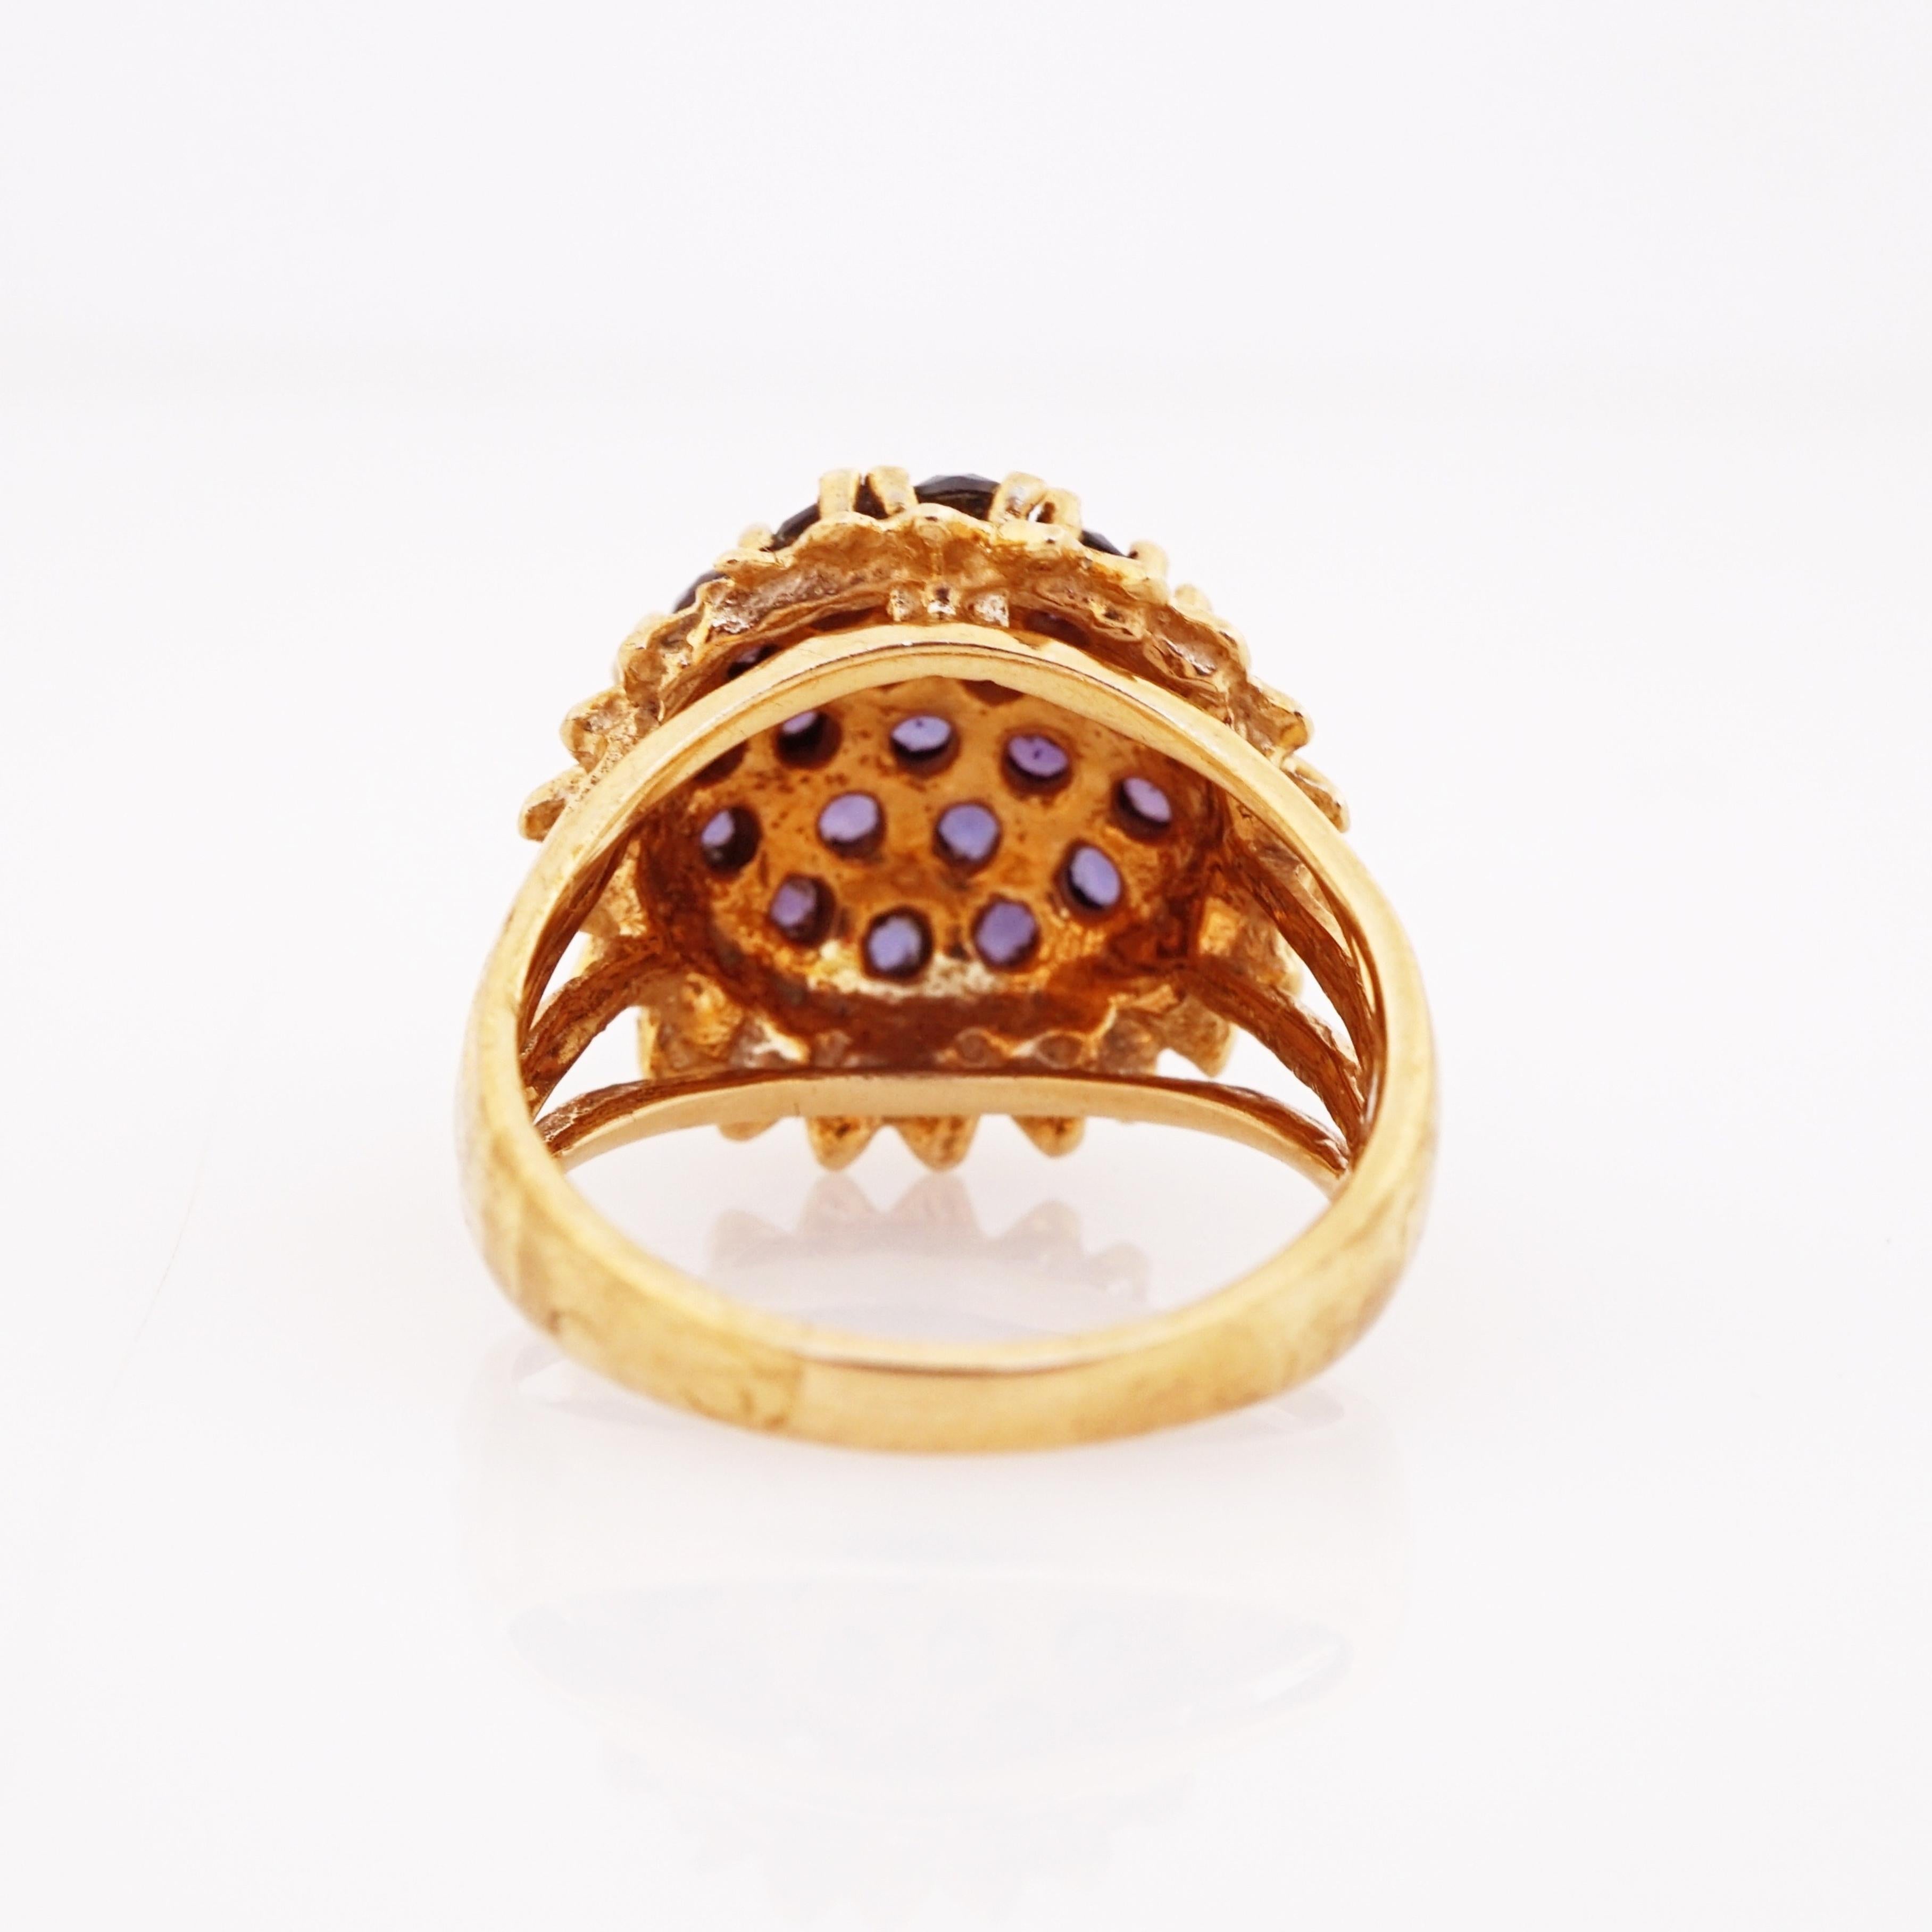 Round Cut 10k Gold Floral Ring with Sapphire Gemstones, 1970s For Sale